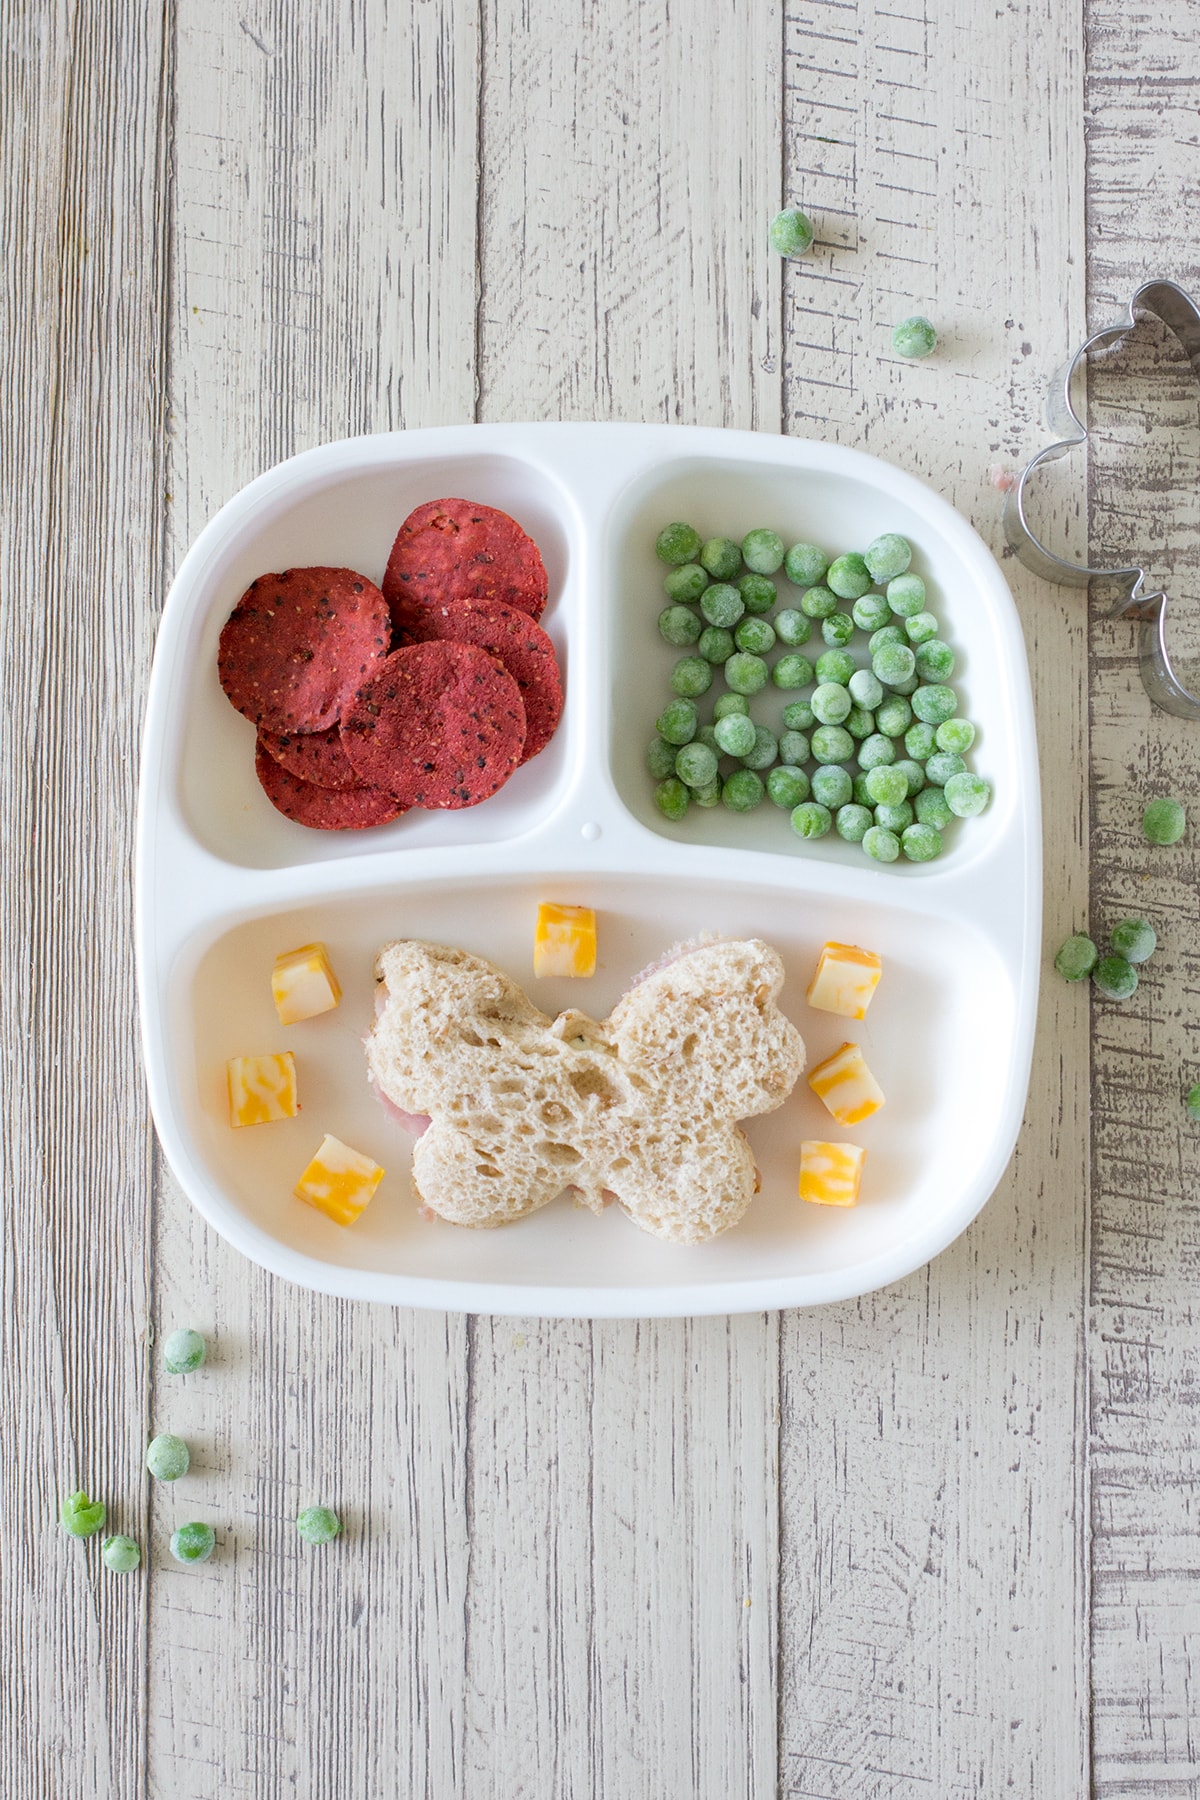 Make Ahead Meals for Toddlers - Twins and Coffee